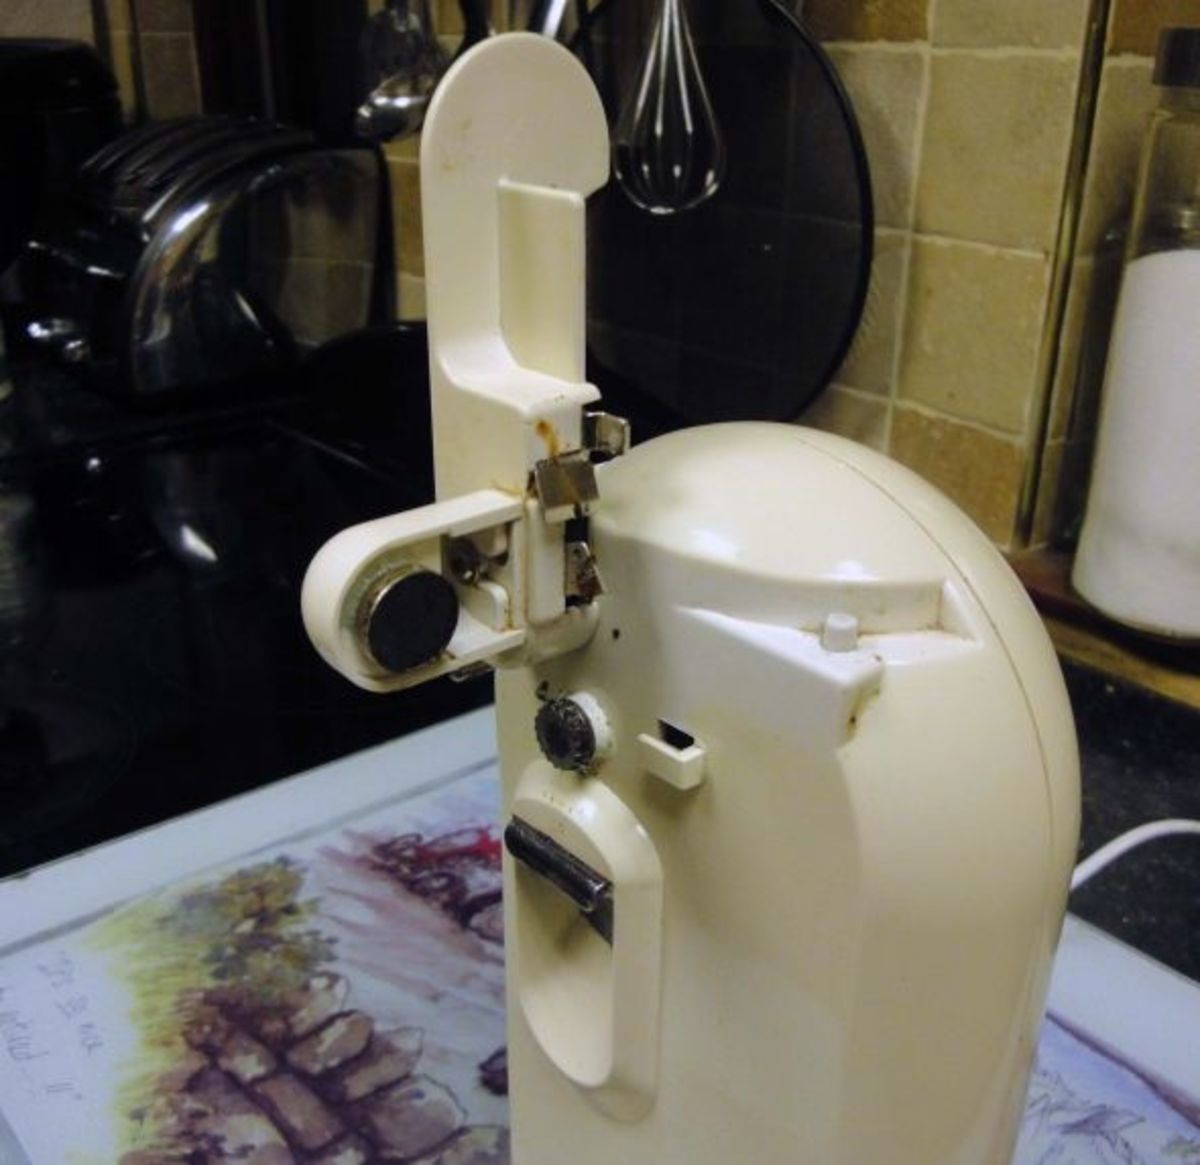 Easy operation handle on can opener